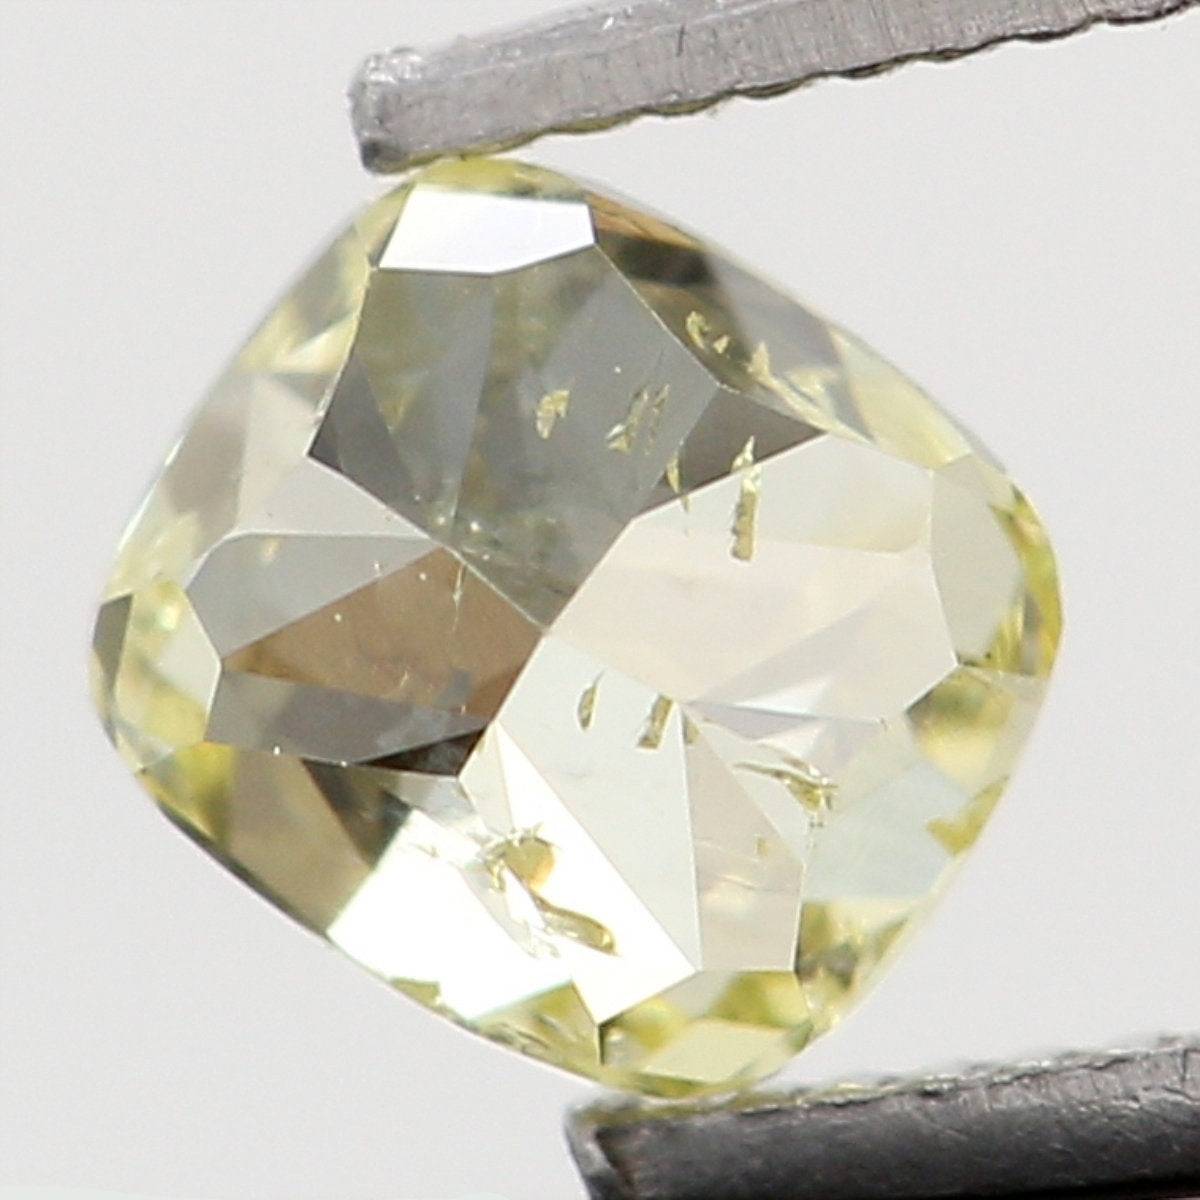 Natural Loose Diamond Cushion Yellow Color SI2 Clarity 3.30 MM 0.16 Ct KR1428